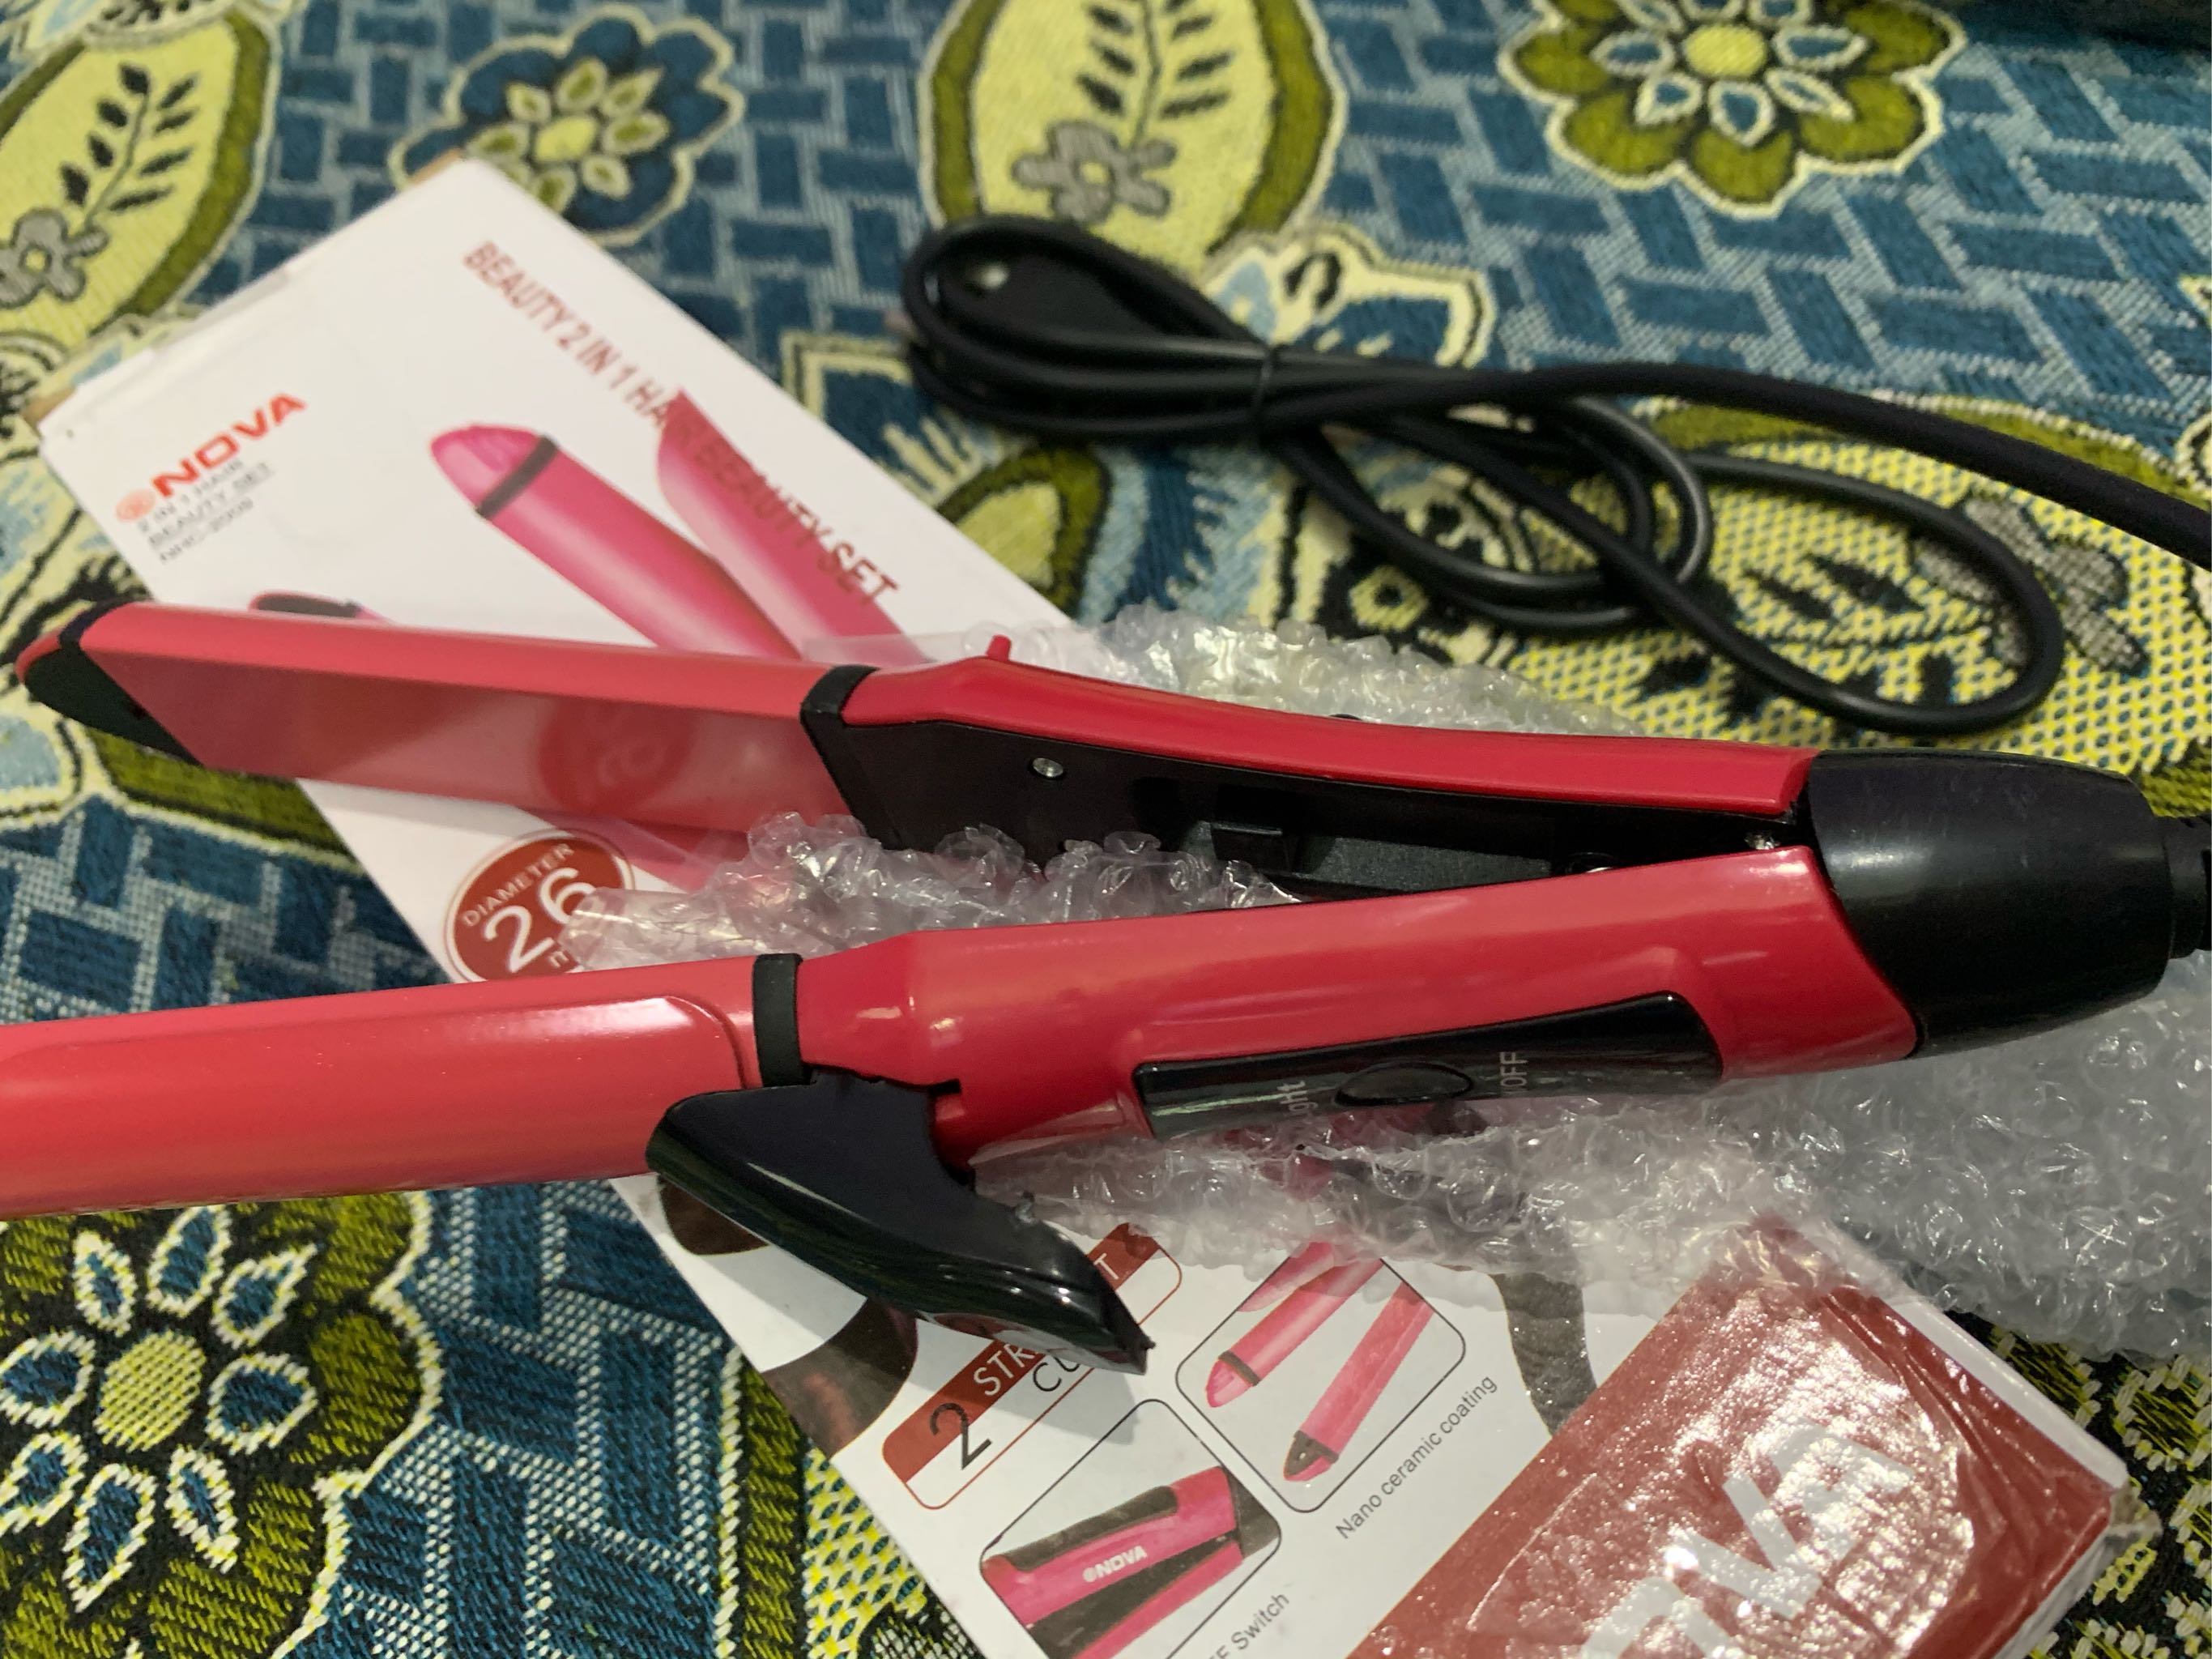  2 in 1 Nova Hair Straightener and Curler + FREE Scarf Pins 40 Pcs